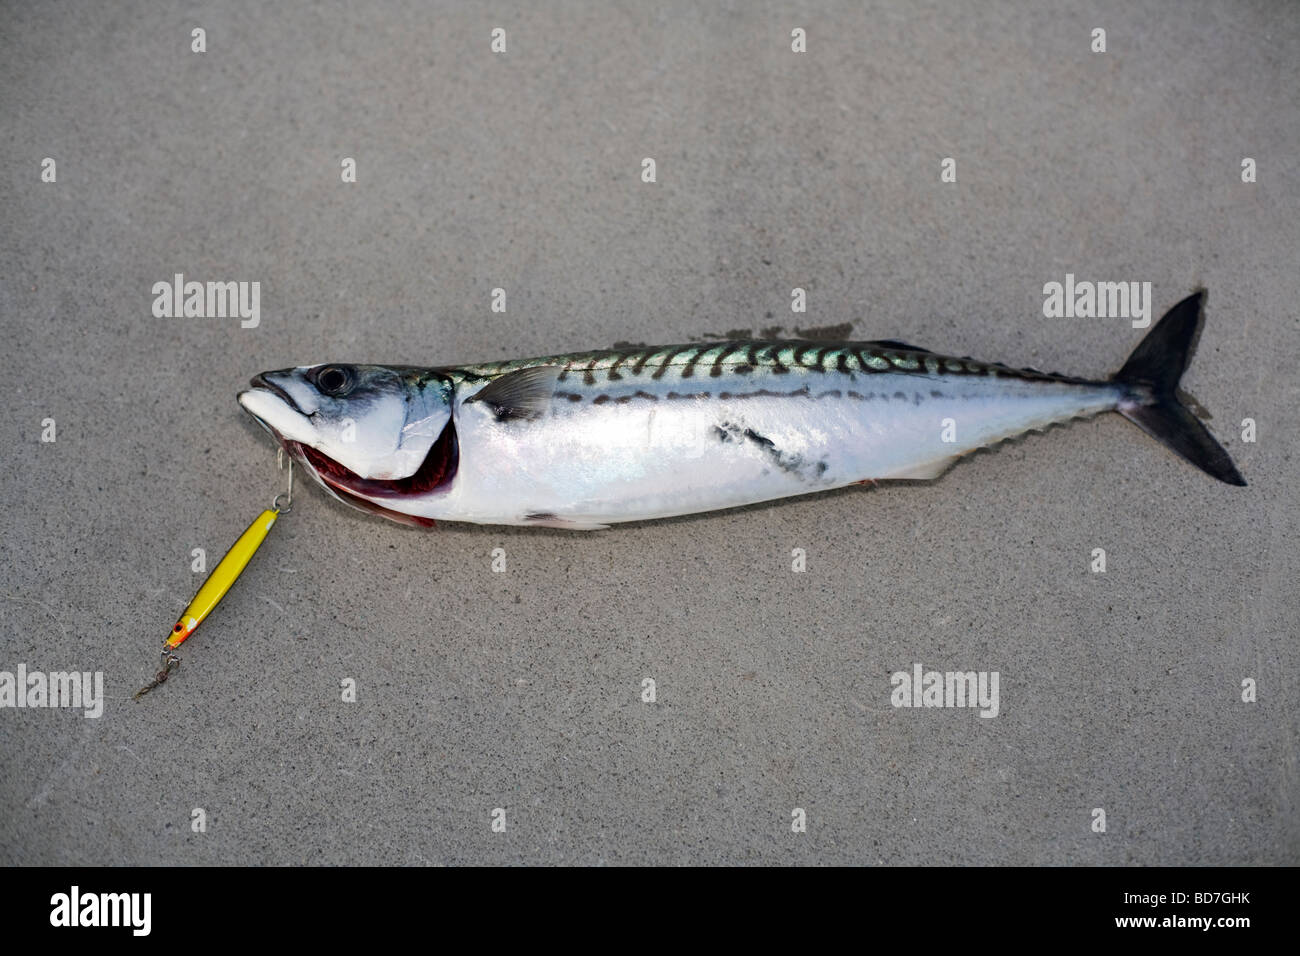 Atlantic mackerel (Scomber scombrus) on ground with hook still attached Stock Photo